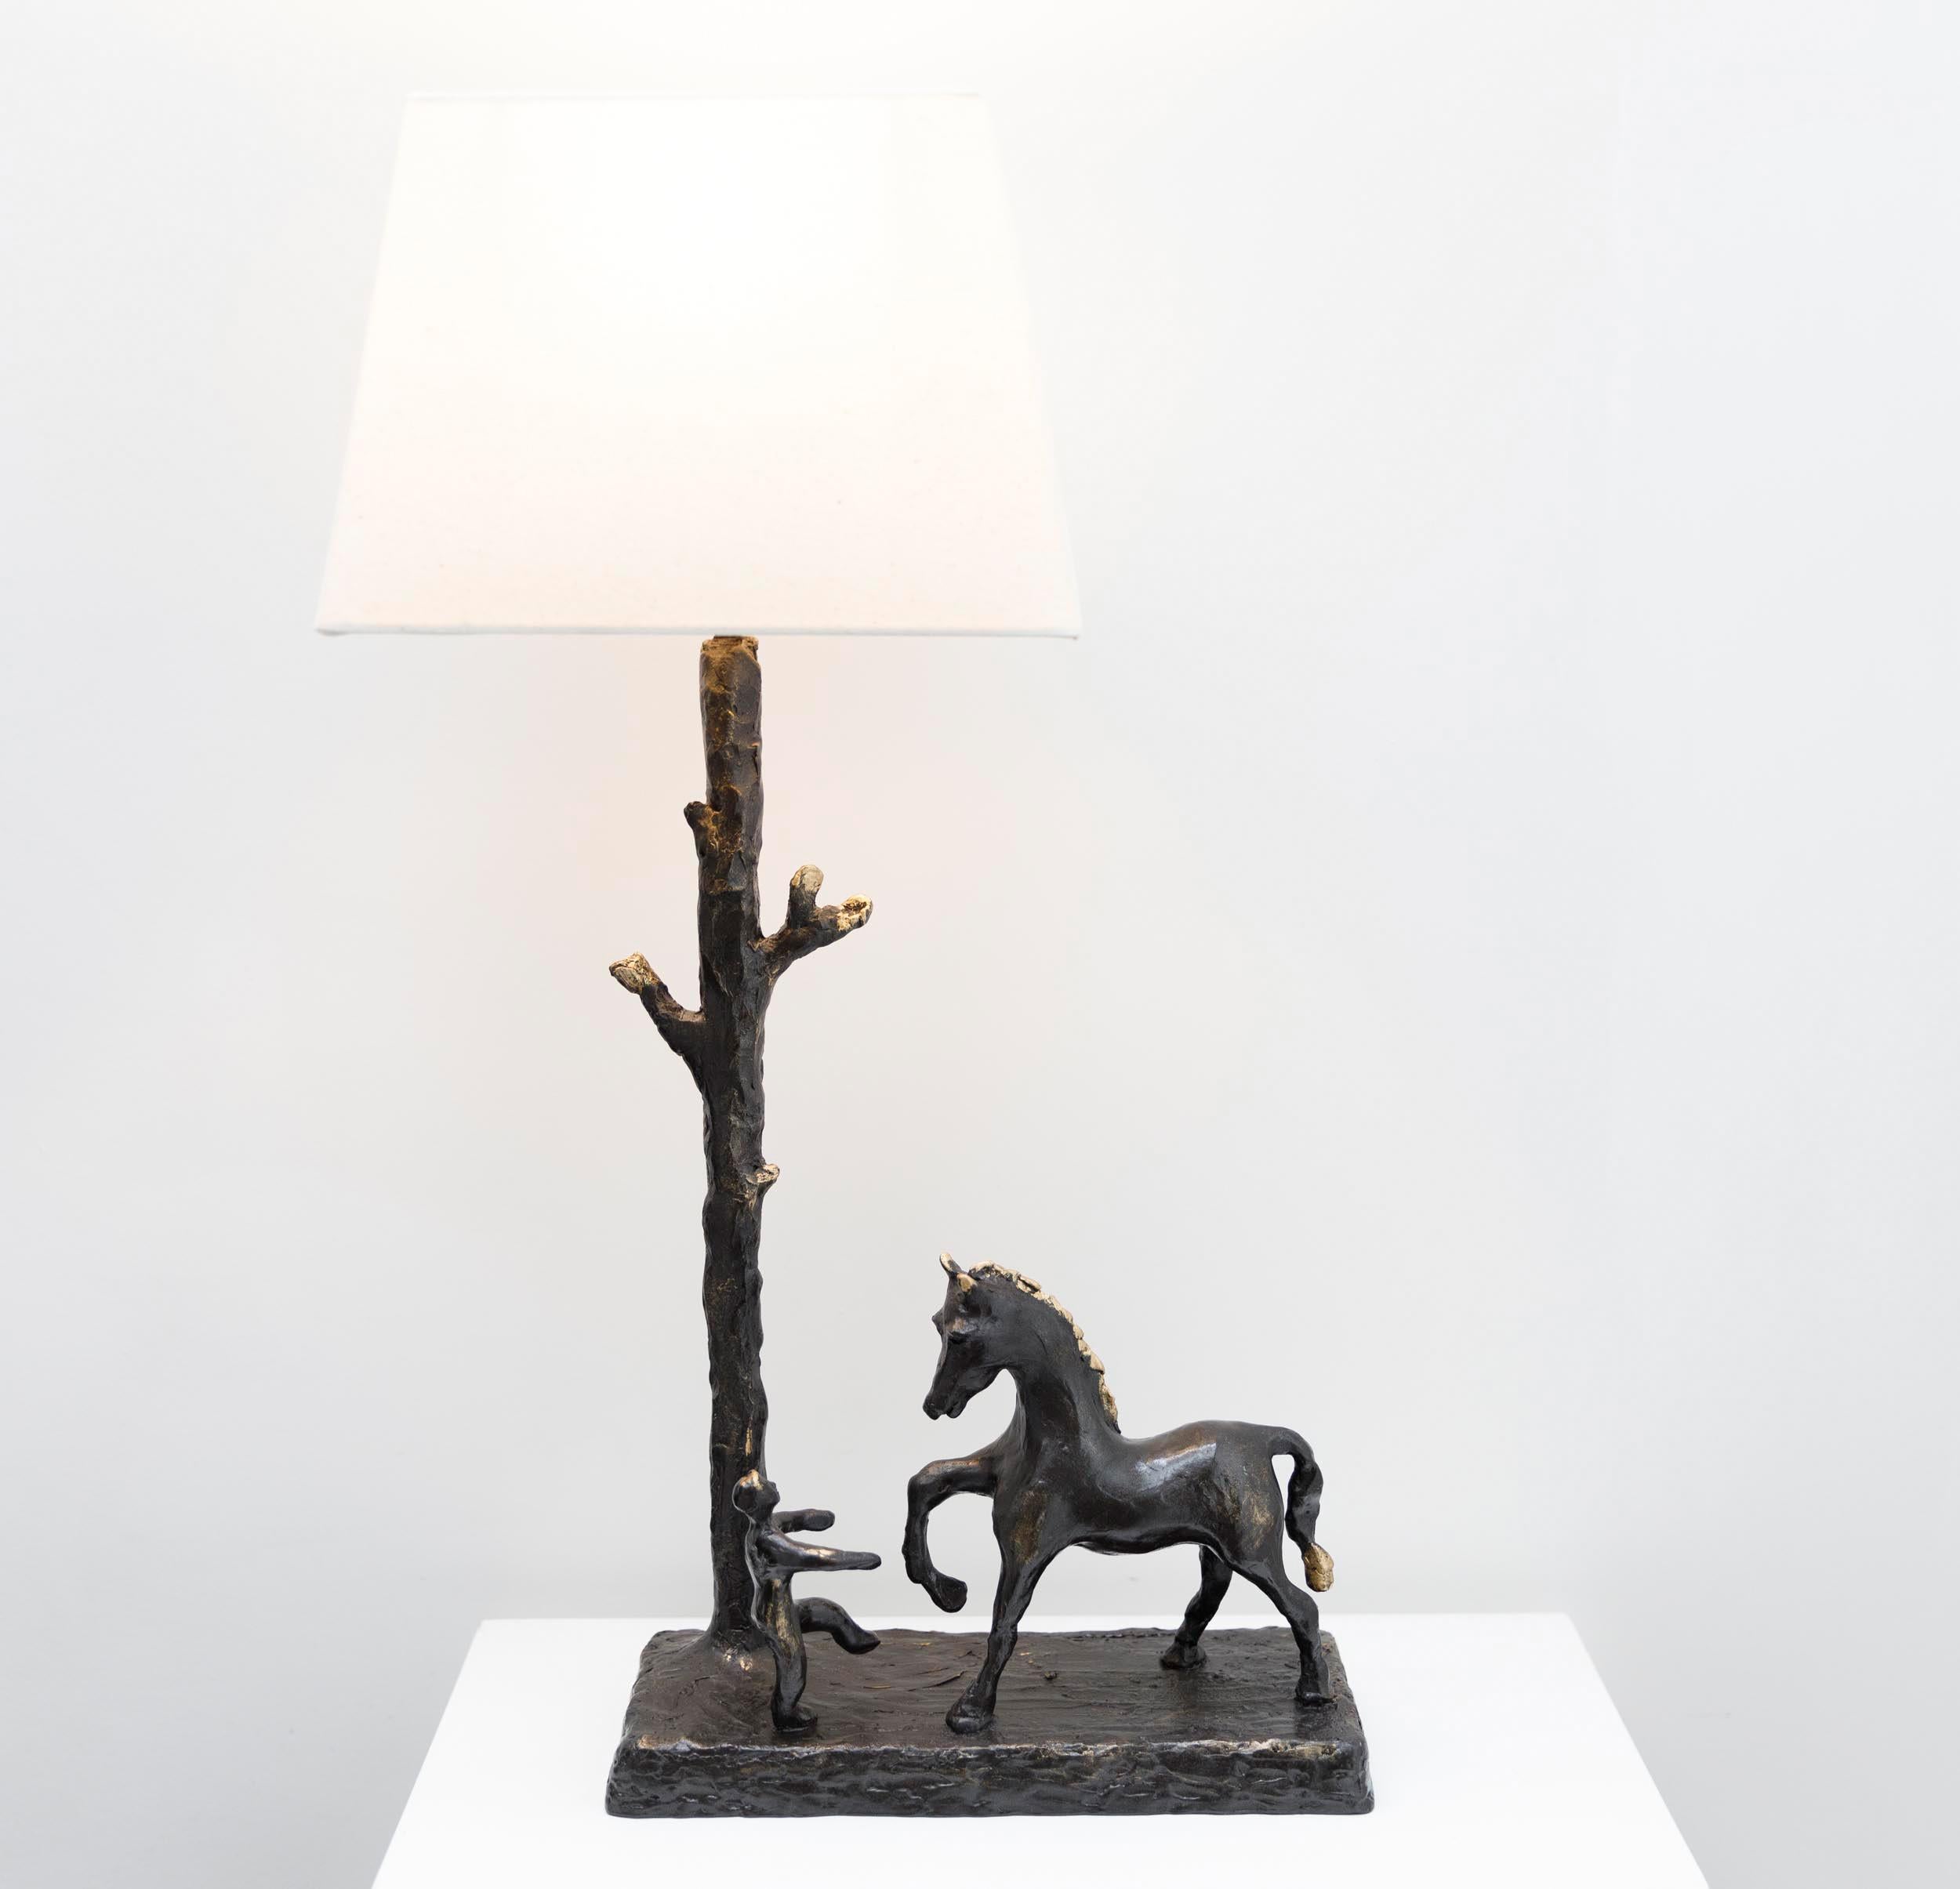 Last in the series of sculptural table lamps this one of a kind Boy & Horse hand crafted lamp is molded and cast in Resin. 
 A whimsical sculptural lamp of a boy and his horse playfully mimicking one another's movements in a captivating pose. The